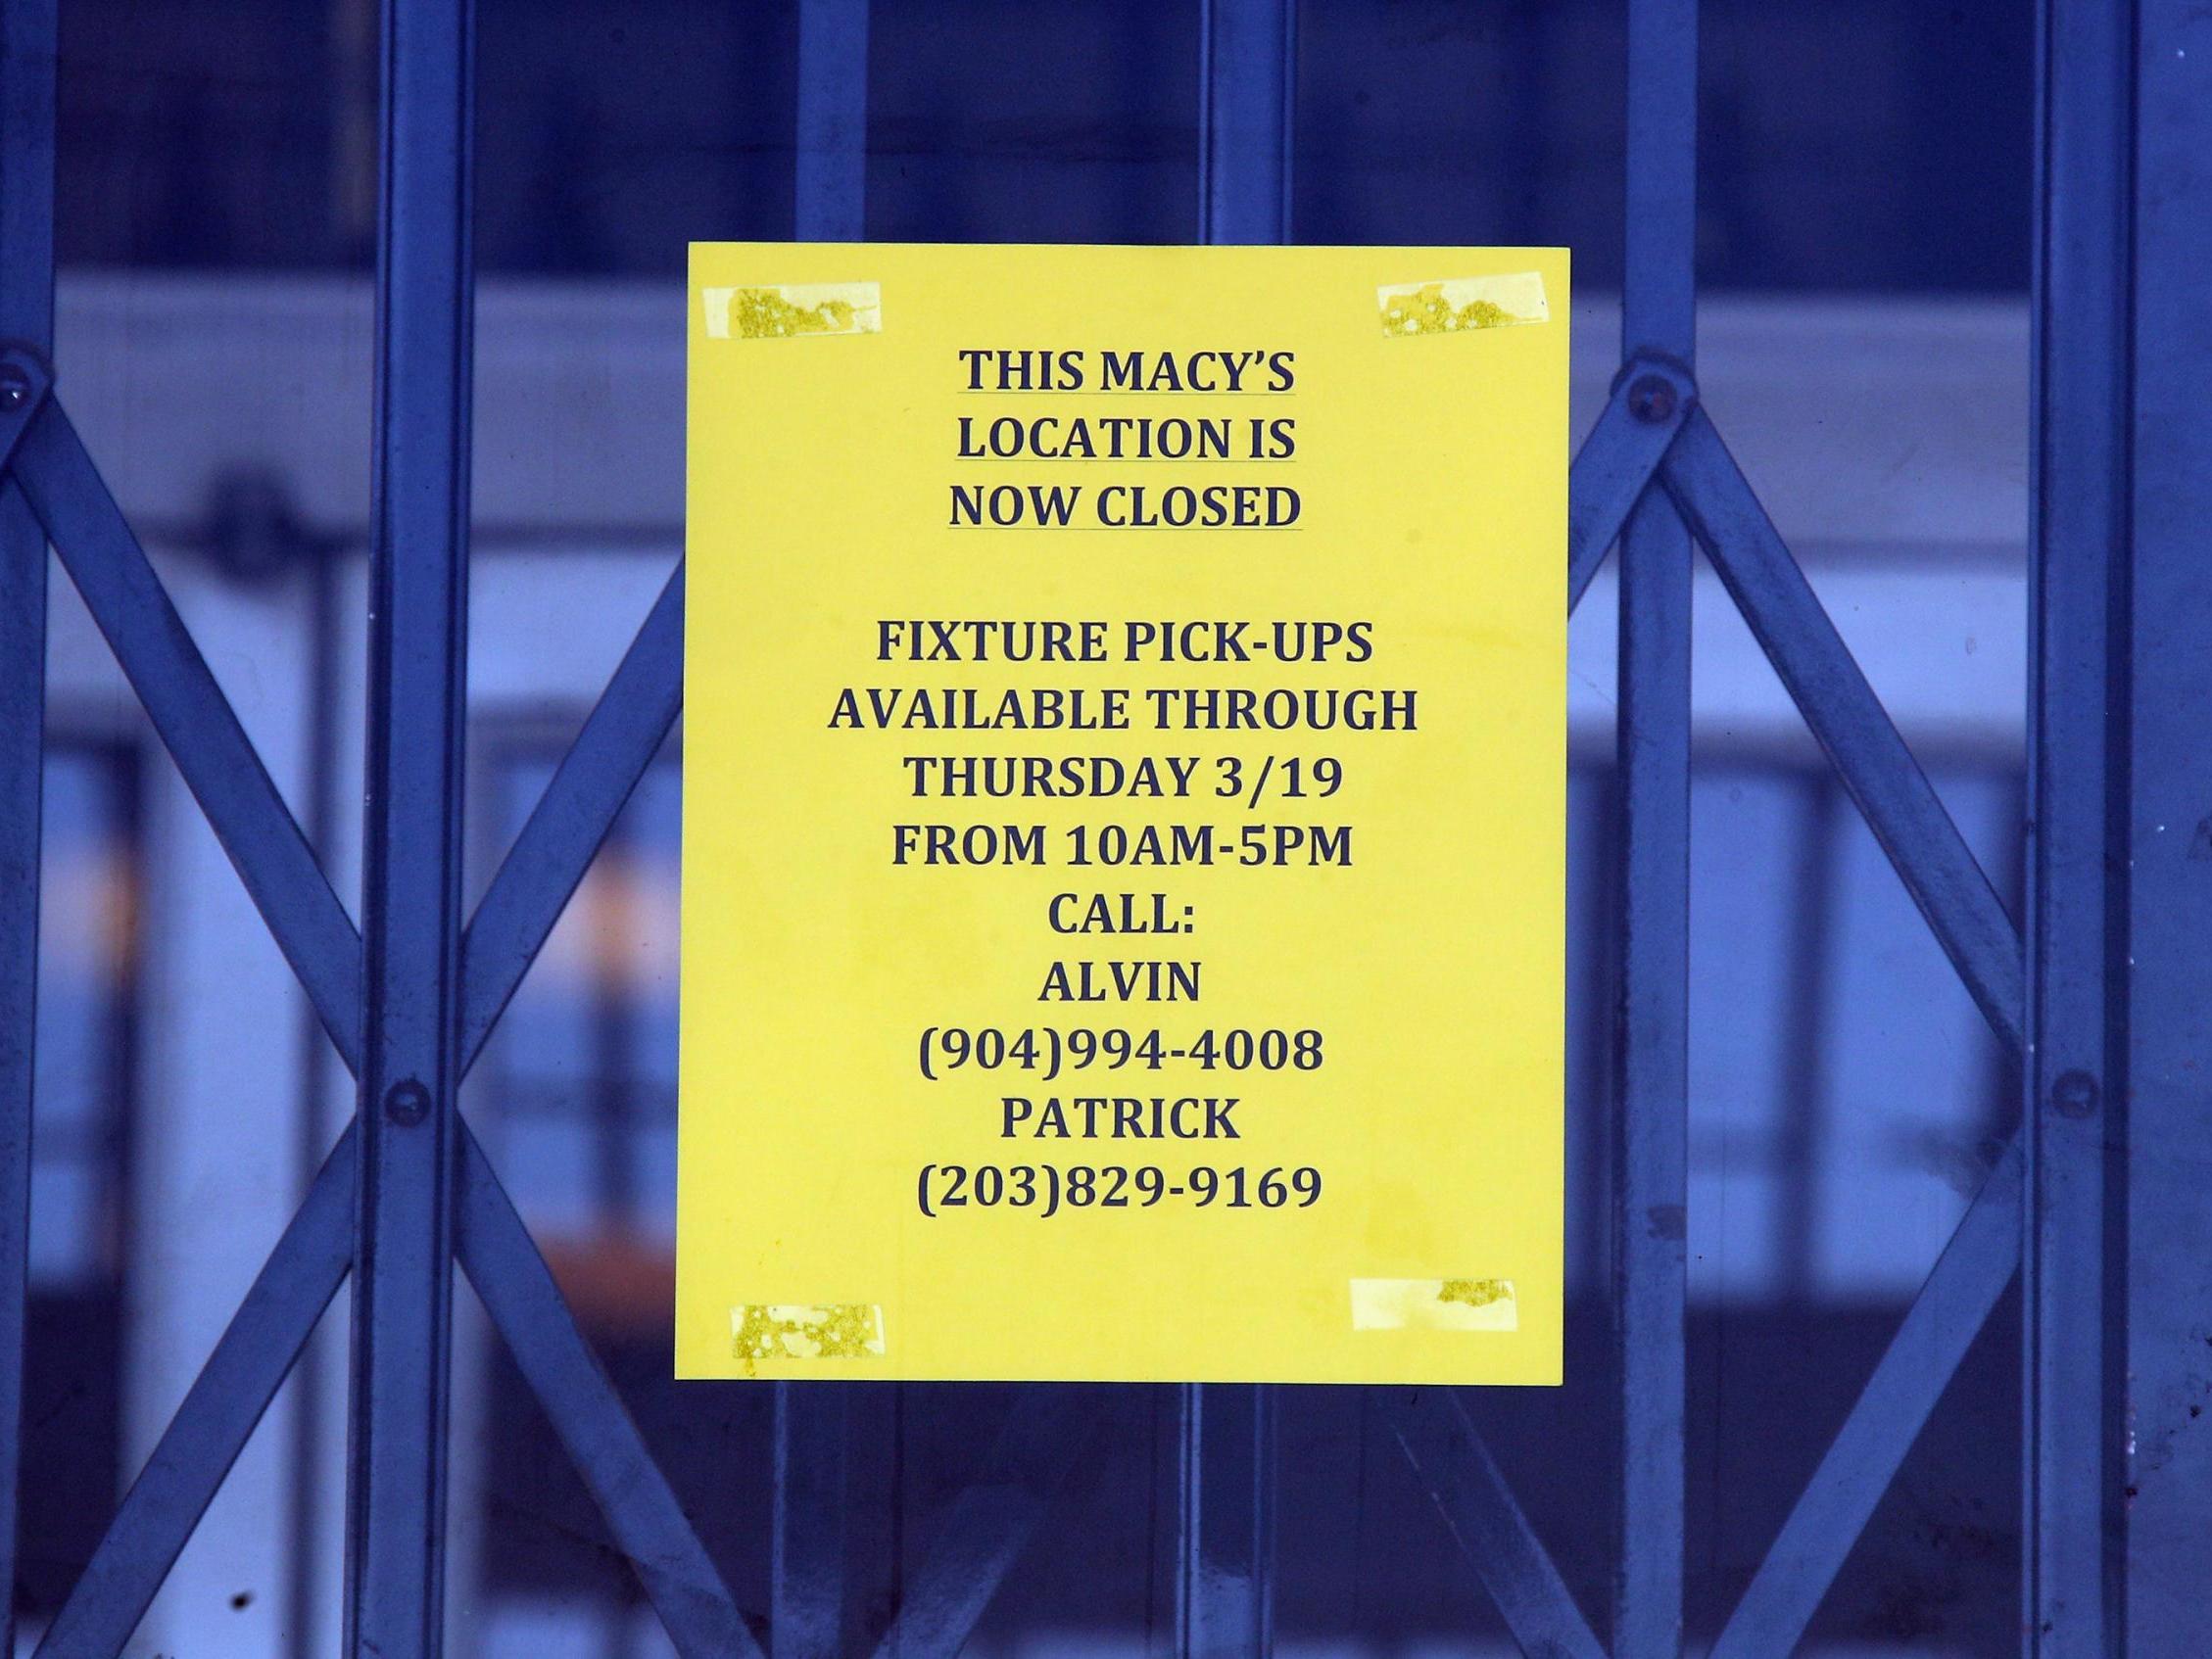 Macy's have closed their stores amid the coronavirus pandemic